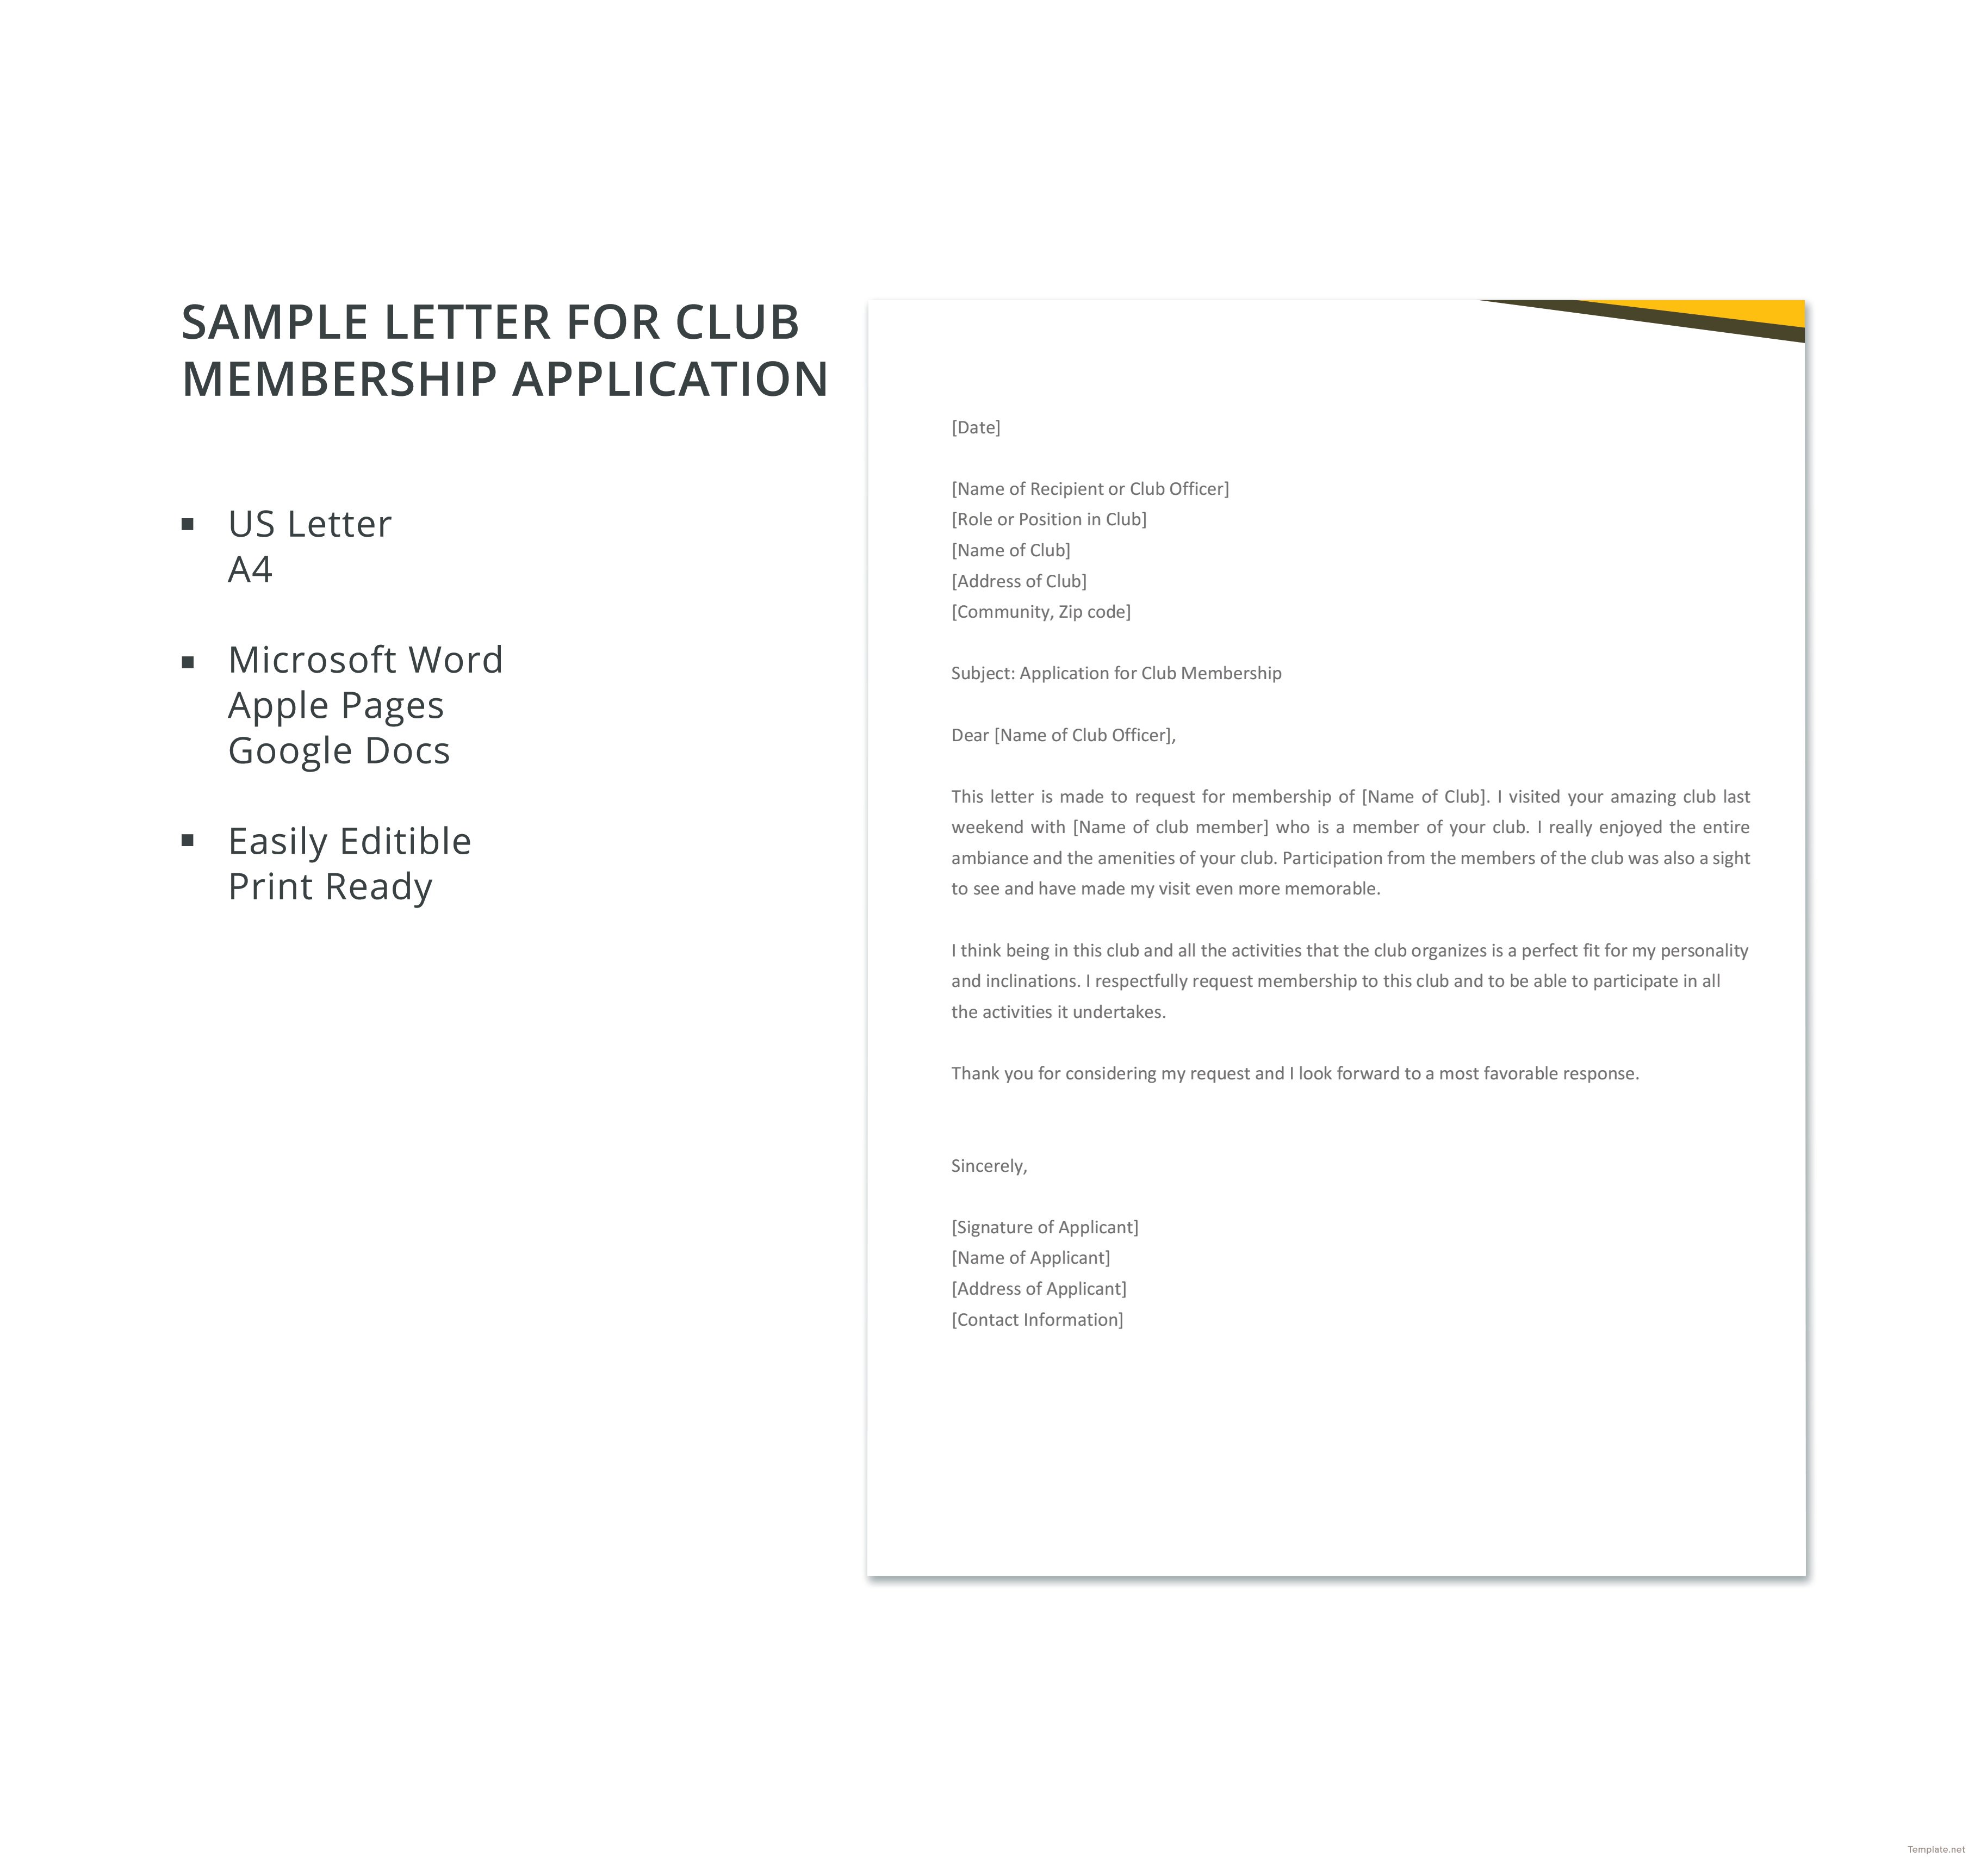 how to write application letter to join a club